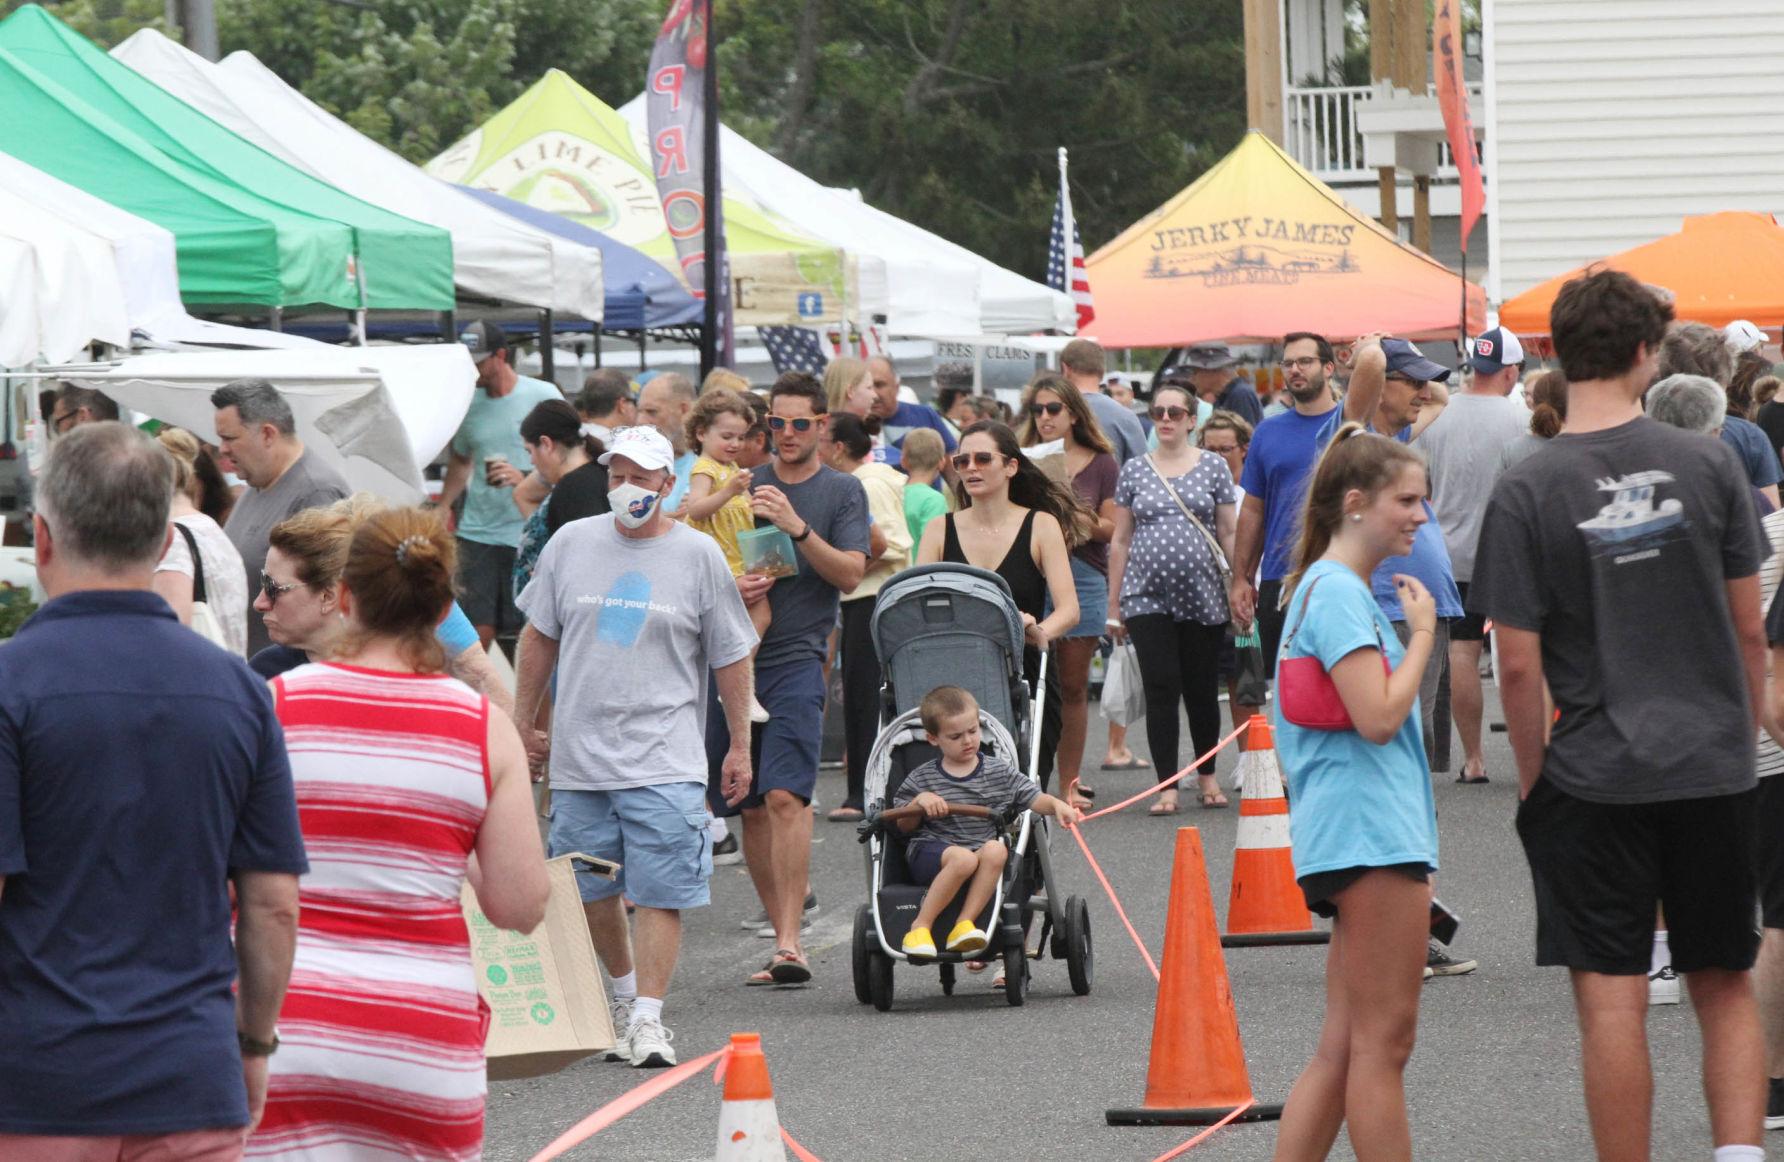 PHOTOS 2021 Red, White & Blueberry Festival in Hammonton Local News